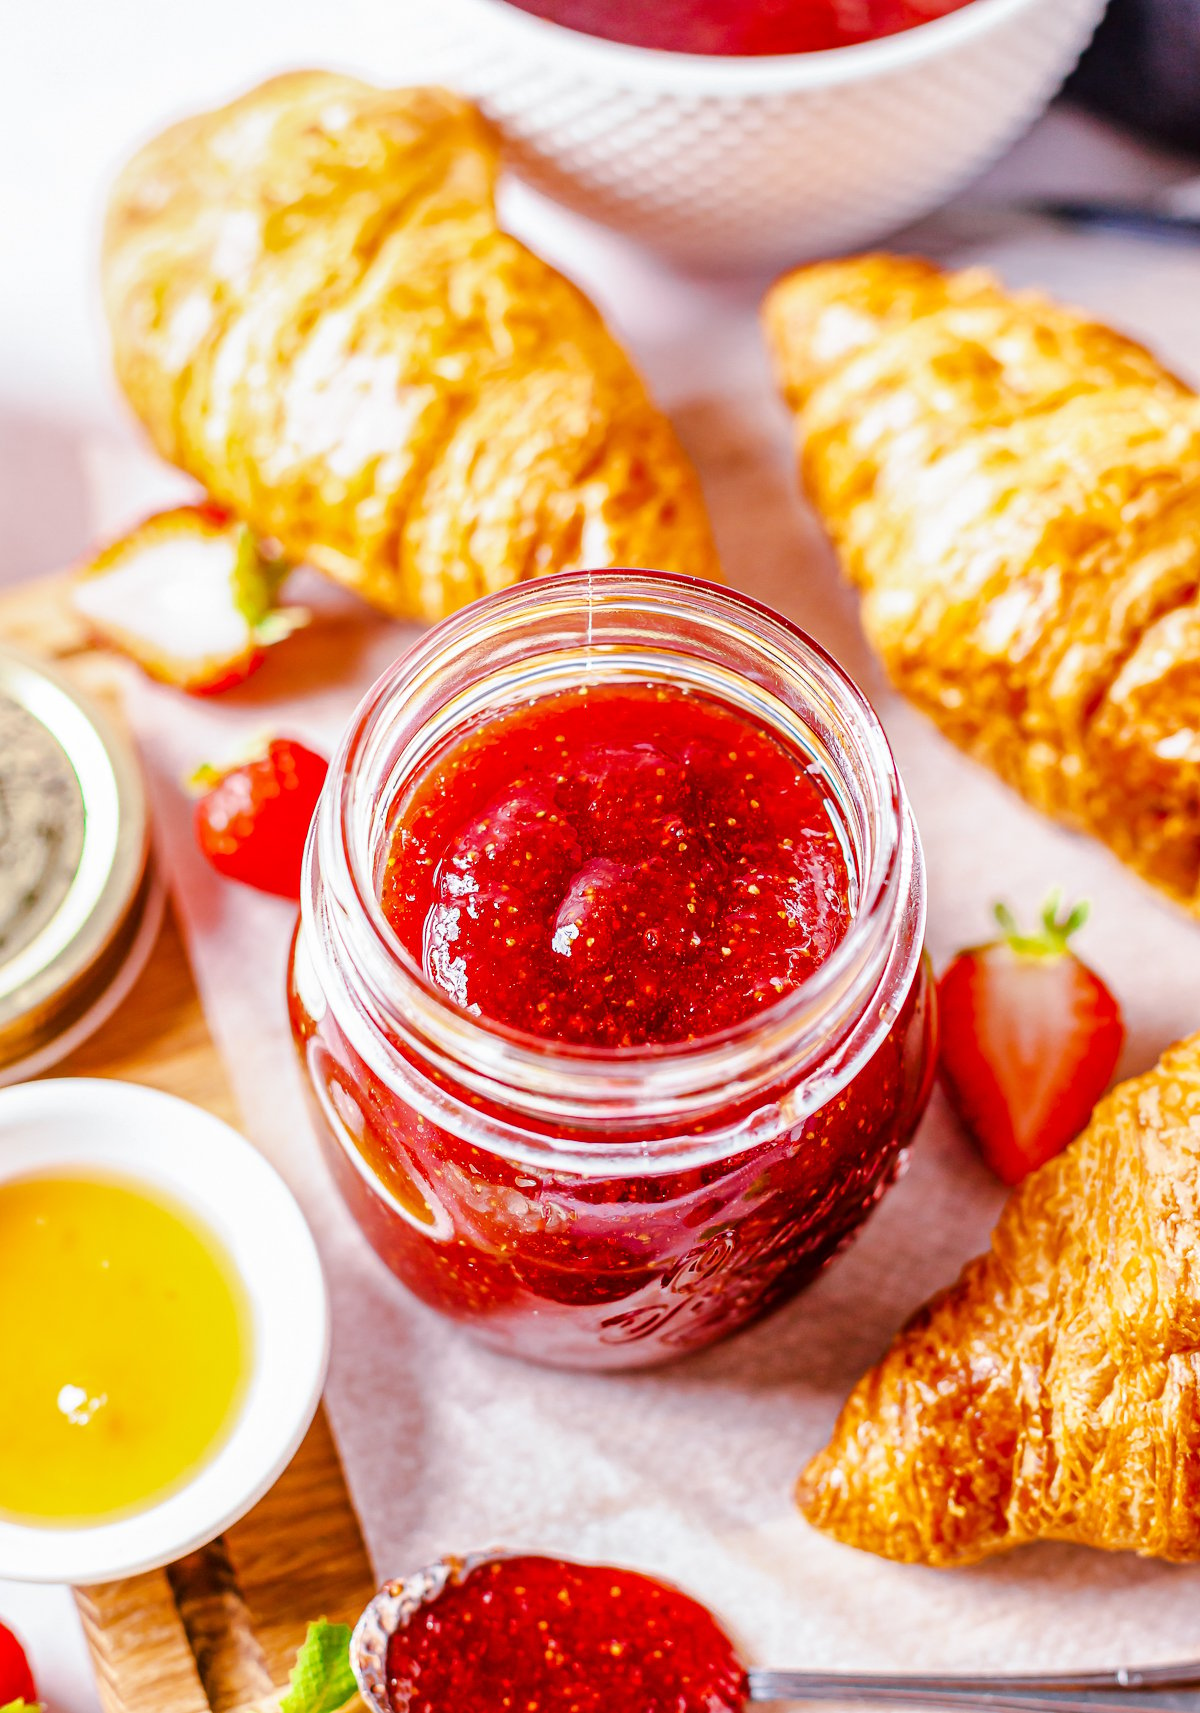 Overhead of Strawberry Butter surrounded by croissants.